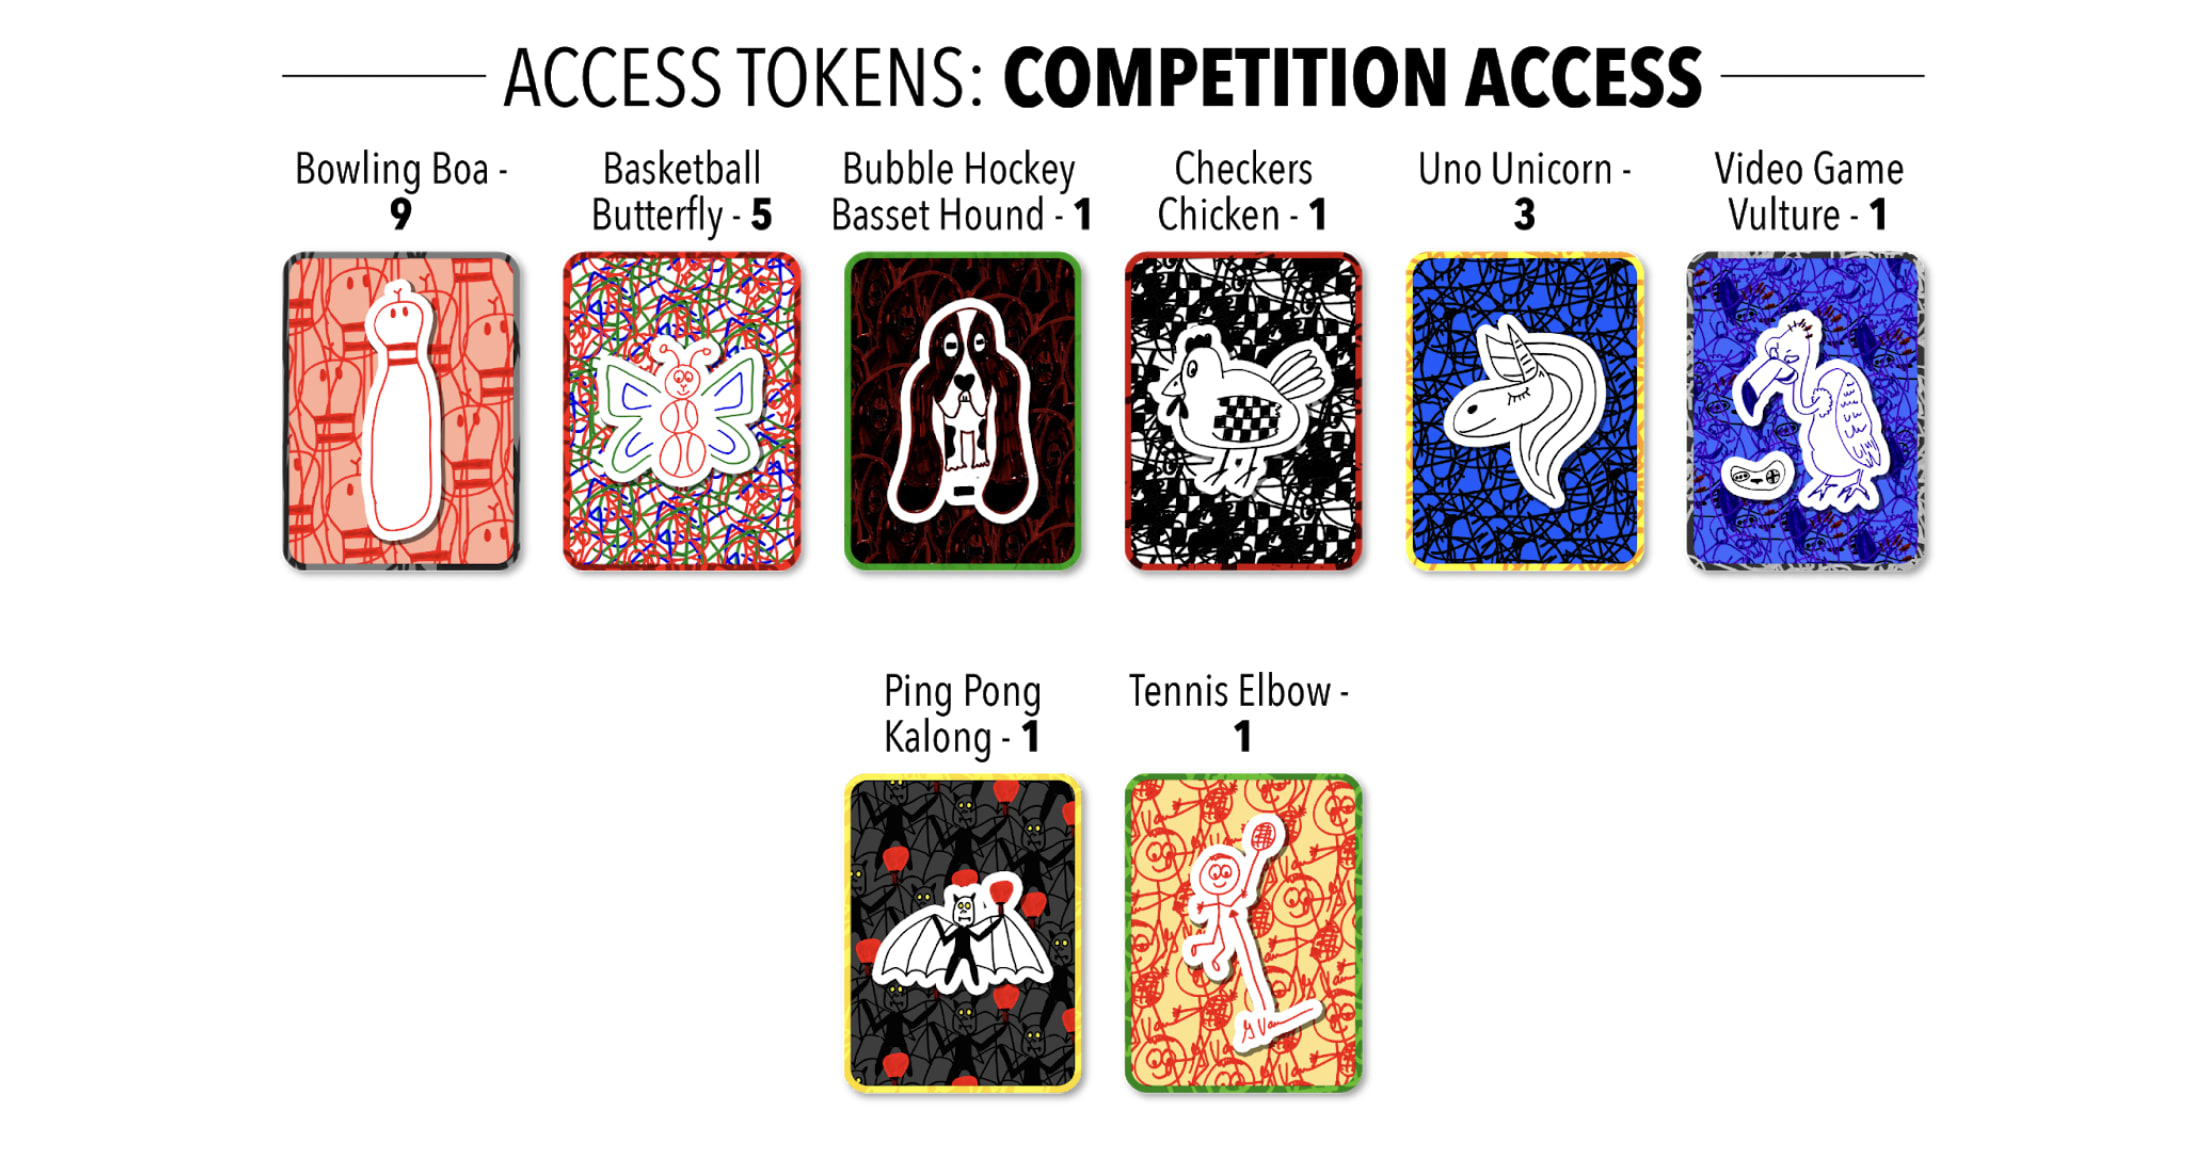 Competition Access Token